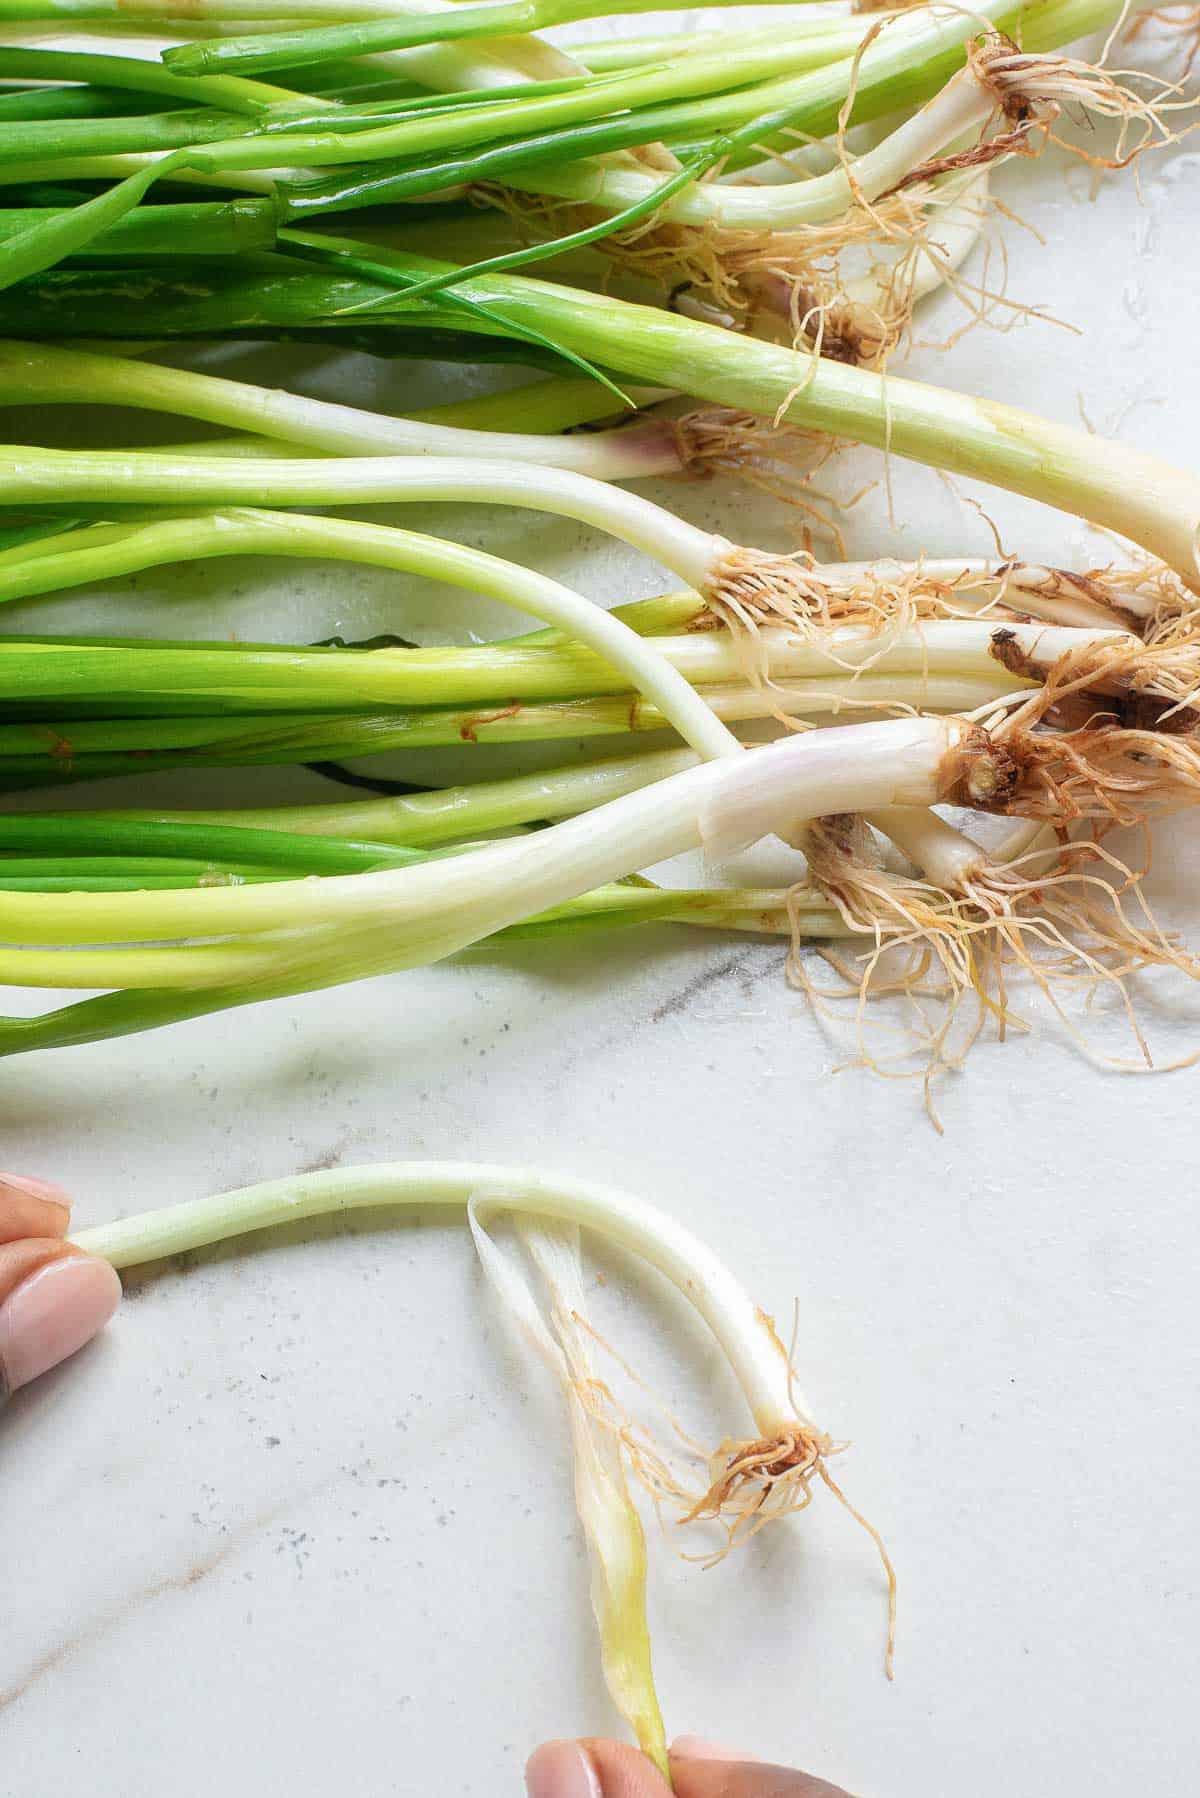 Peeling off outer layers of green onions.